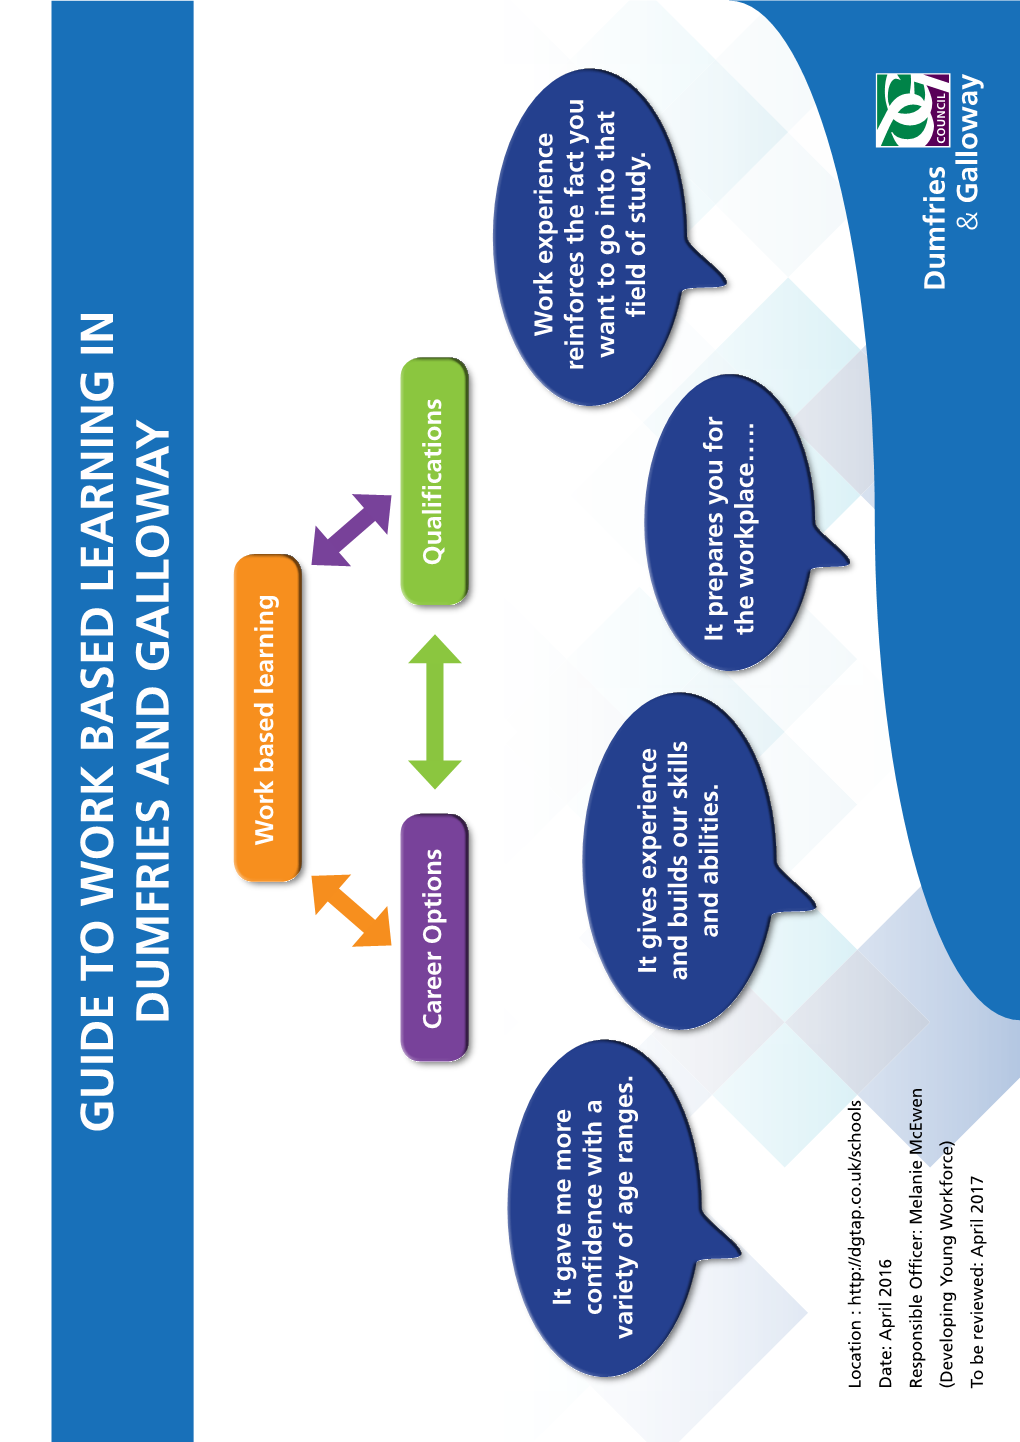 Guide to Work Based Learning in Dumfries and Galloway